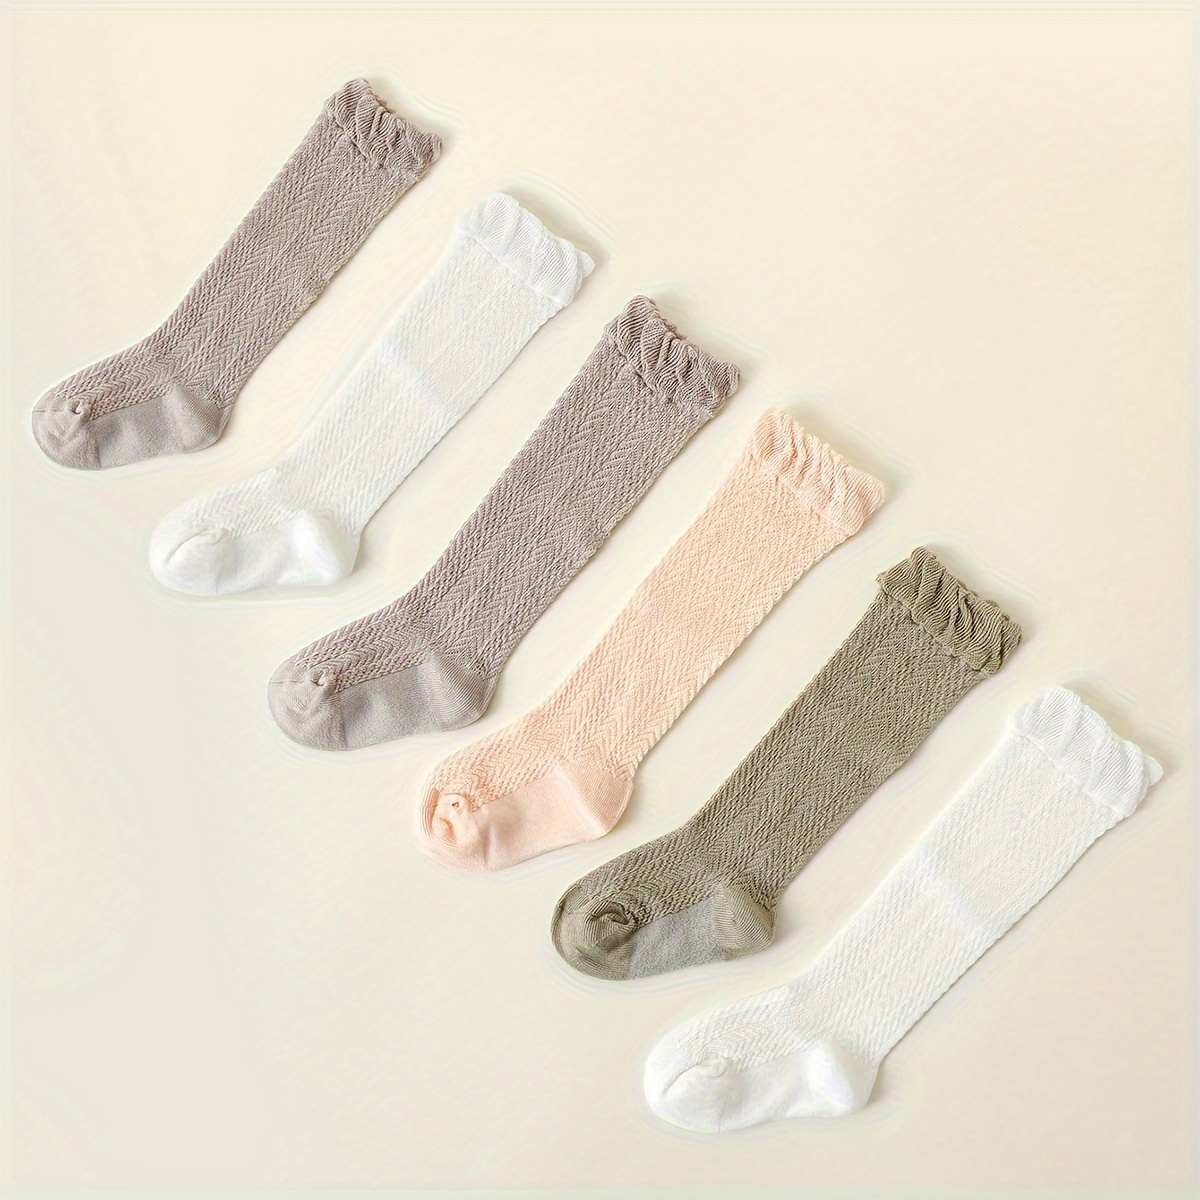 

6 Pairs Of Girl's Baby's Toddler's Solid Mesh Long-tube Socks, Breathable Soft Cotton Blend Leggings For Spring And Summer